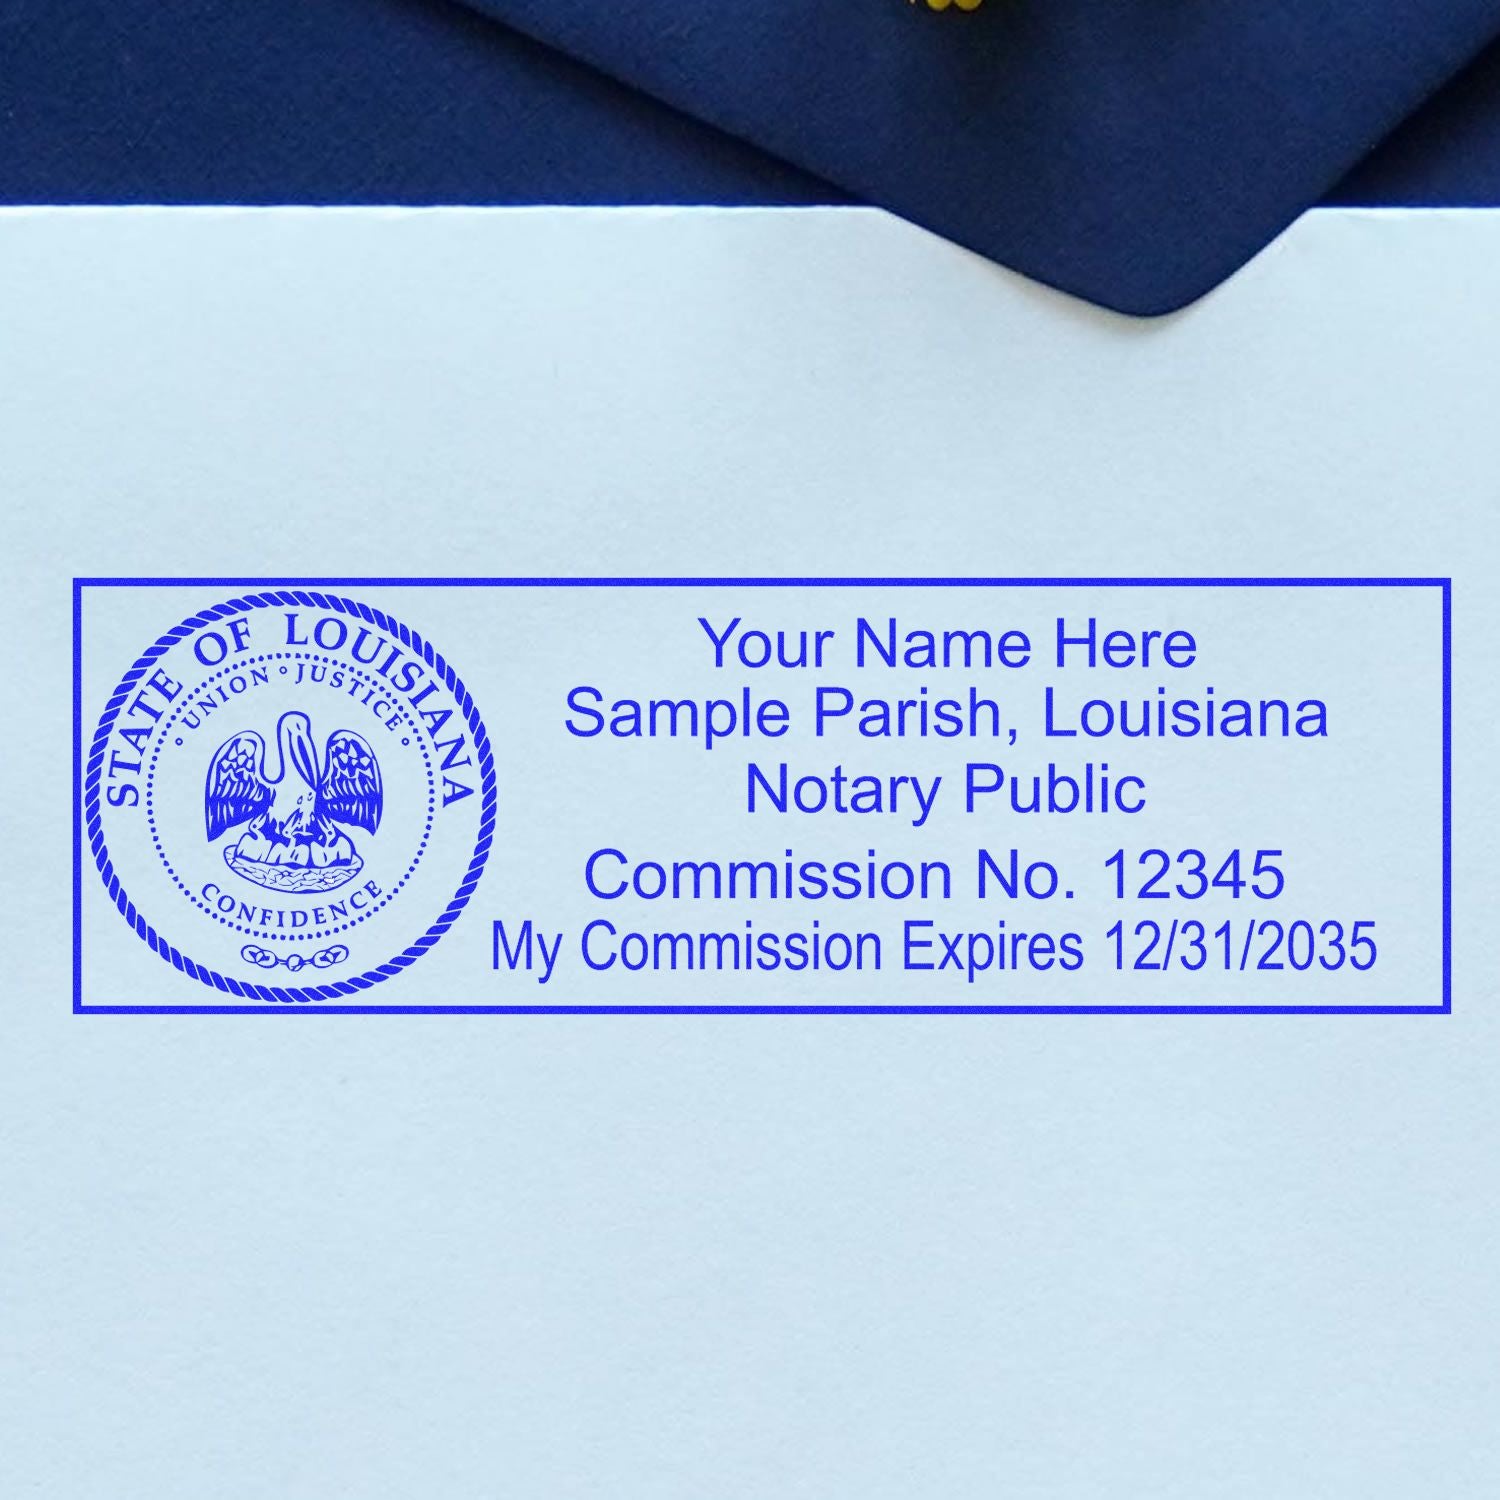 This paper is stamped with a sample imprint of the Slim Pre-Inked State Seal Notary Stamp for Louisiana, signifying its quality and reliability.